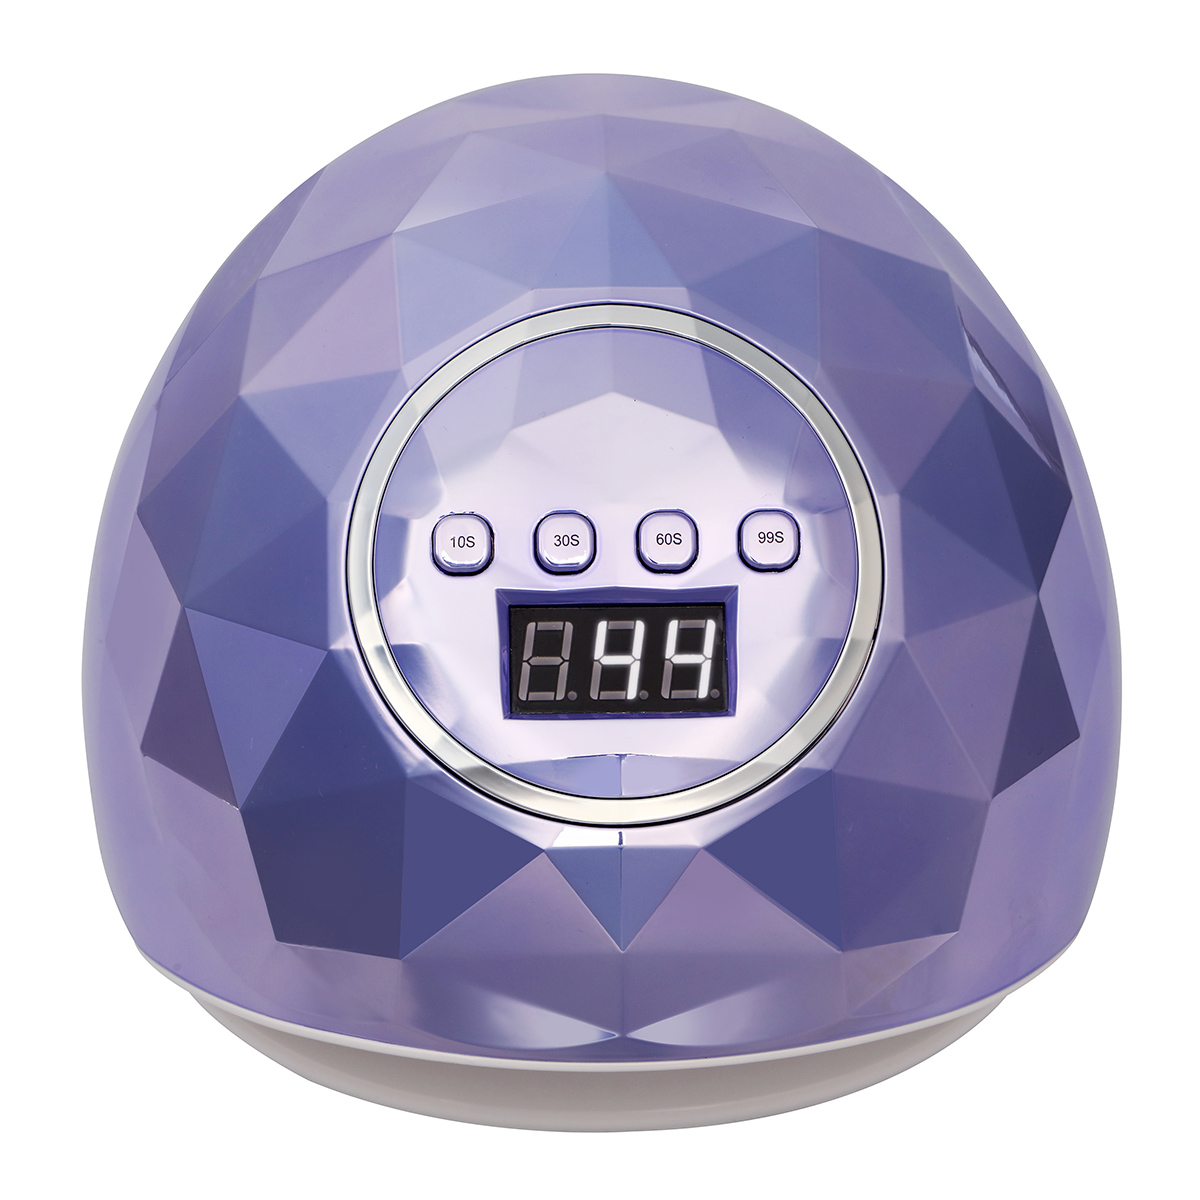 86W-UV-LED-Nail-Lamp-Automatic-Curing-Nail-Dryer-LCD-Display-Manicure-Pedicure-Tools-1844147-9